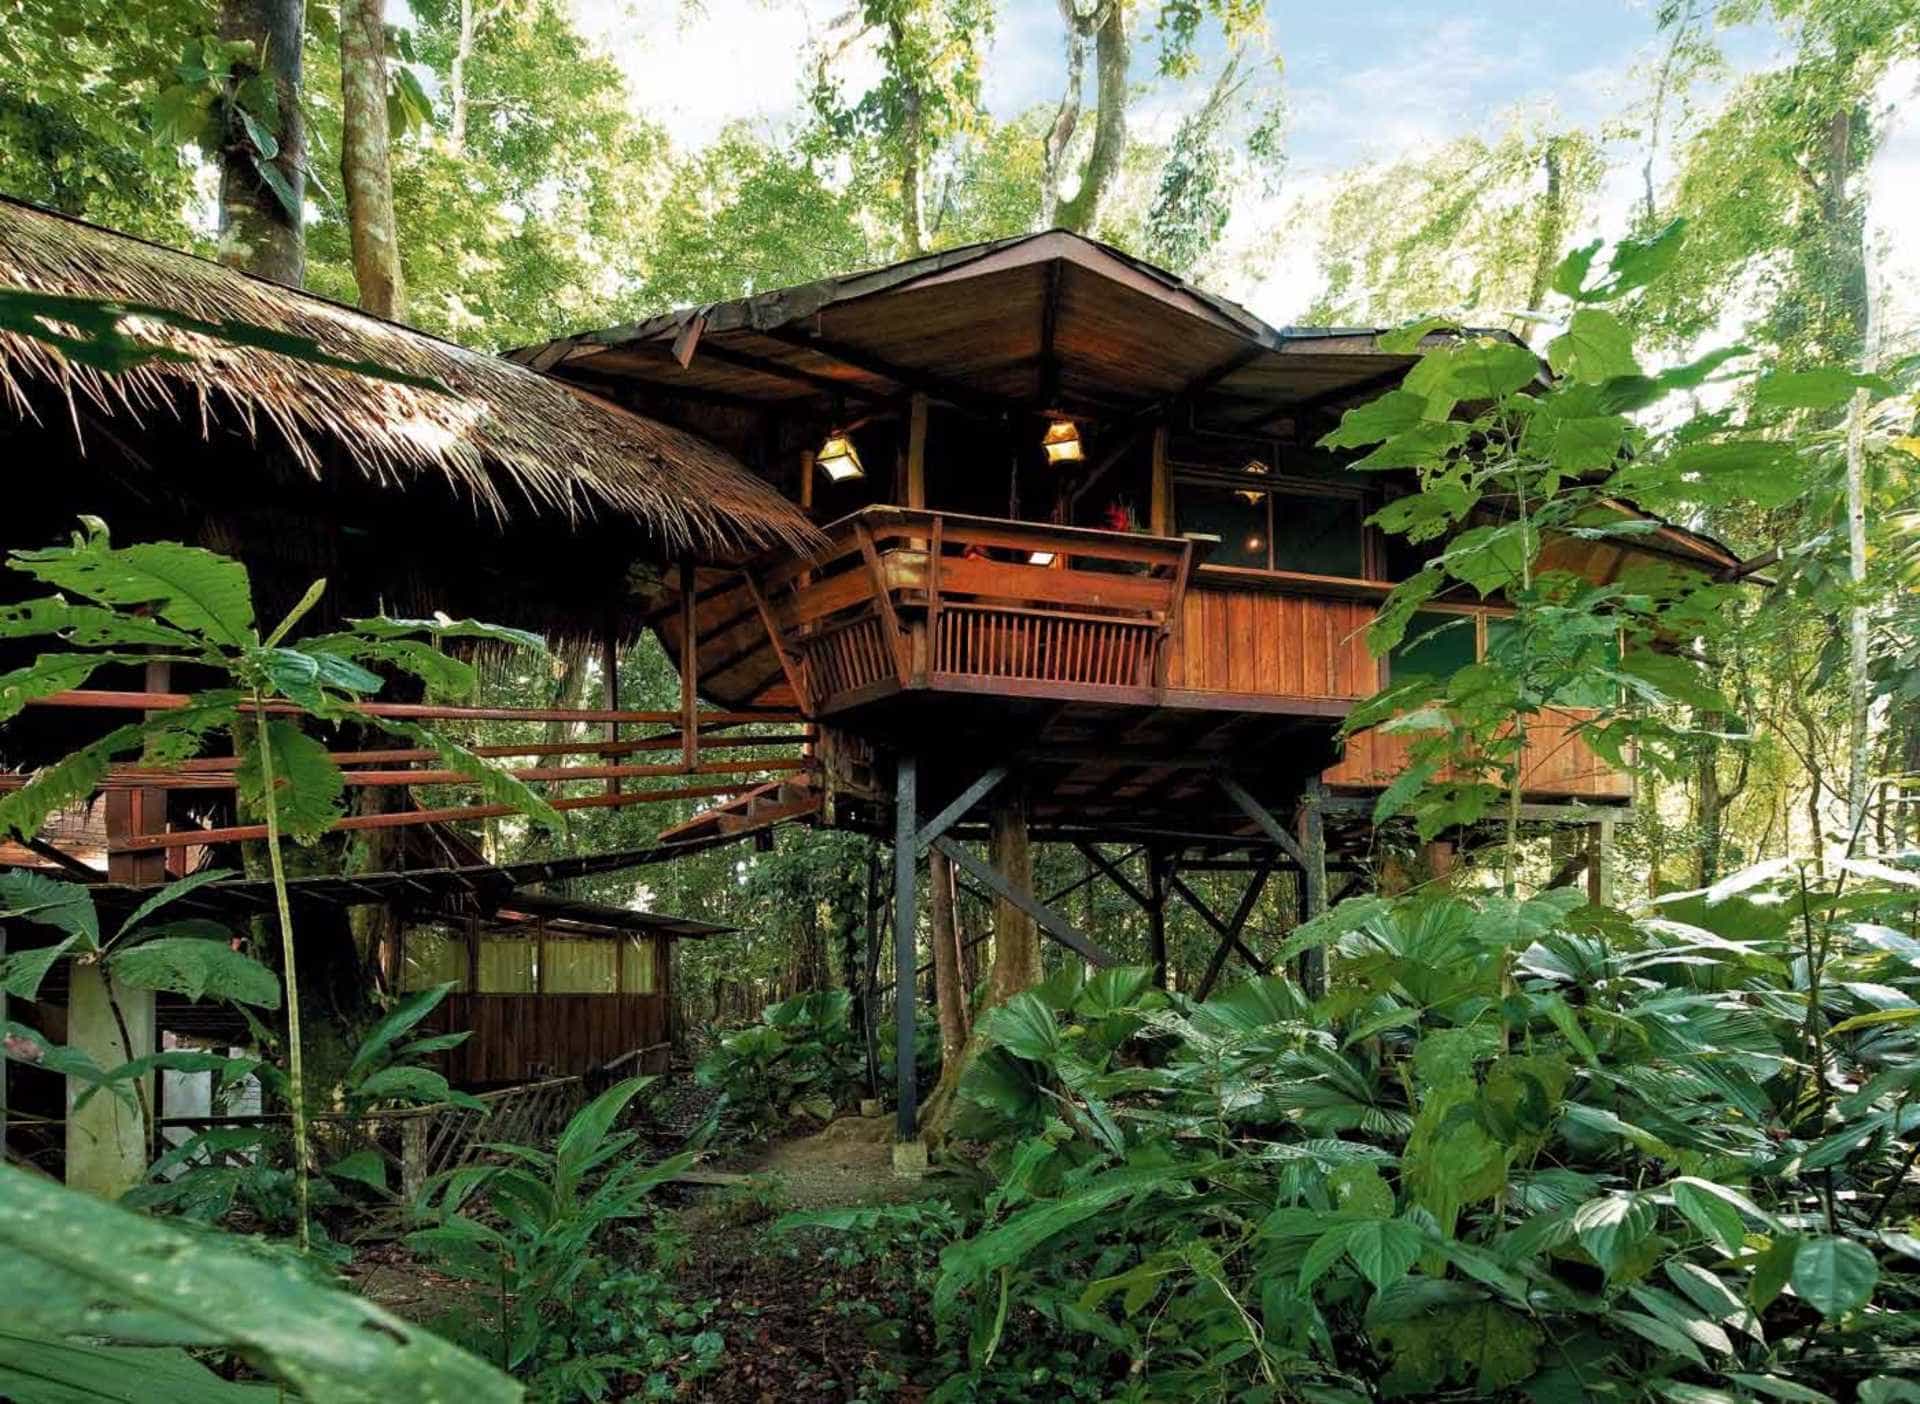 An exterior view of Treehouse Lodge in Punta Uva in Costa Rica